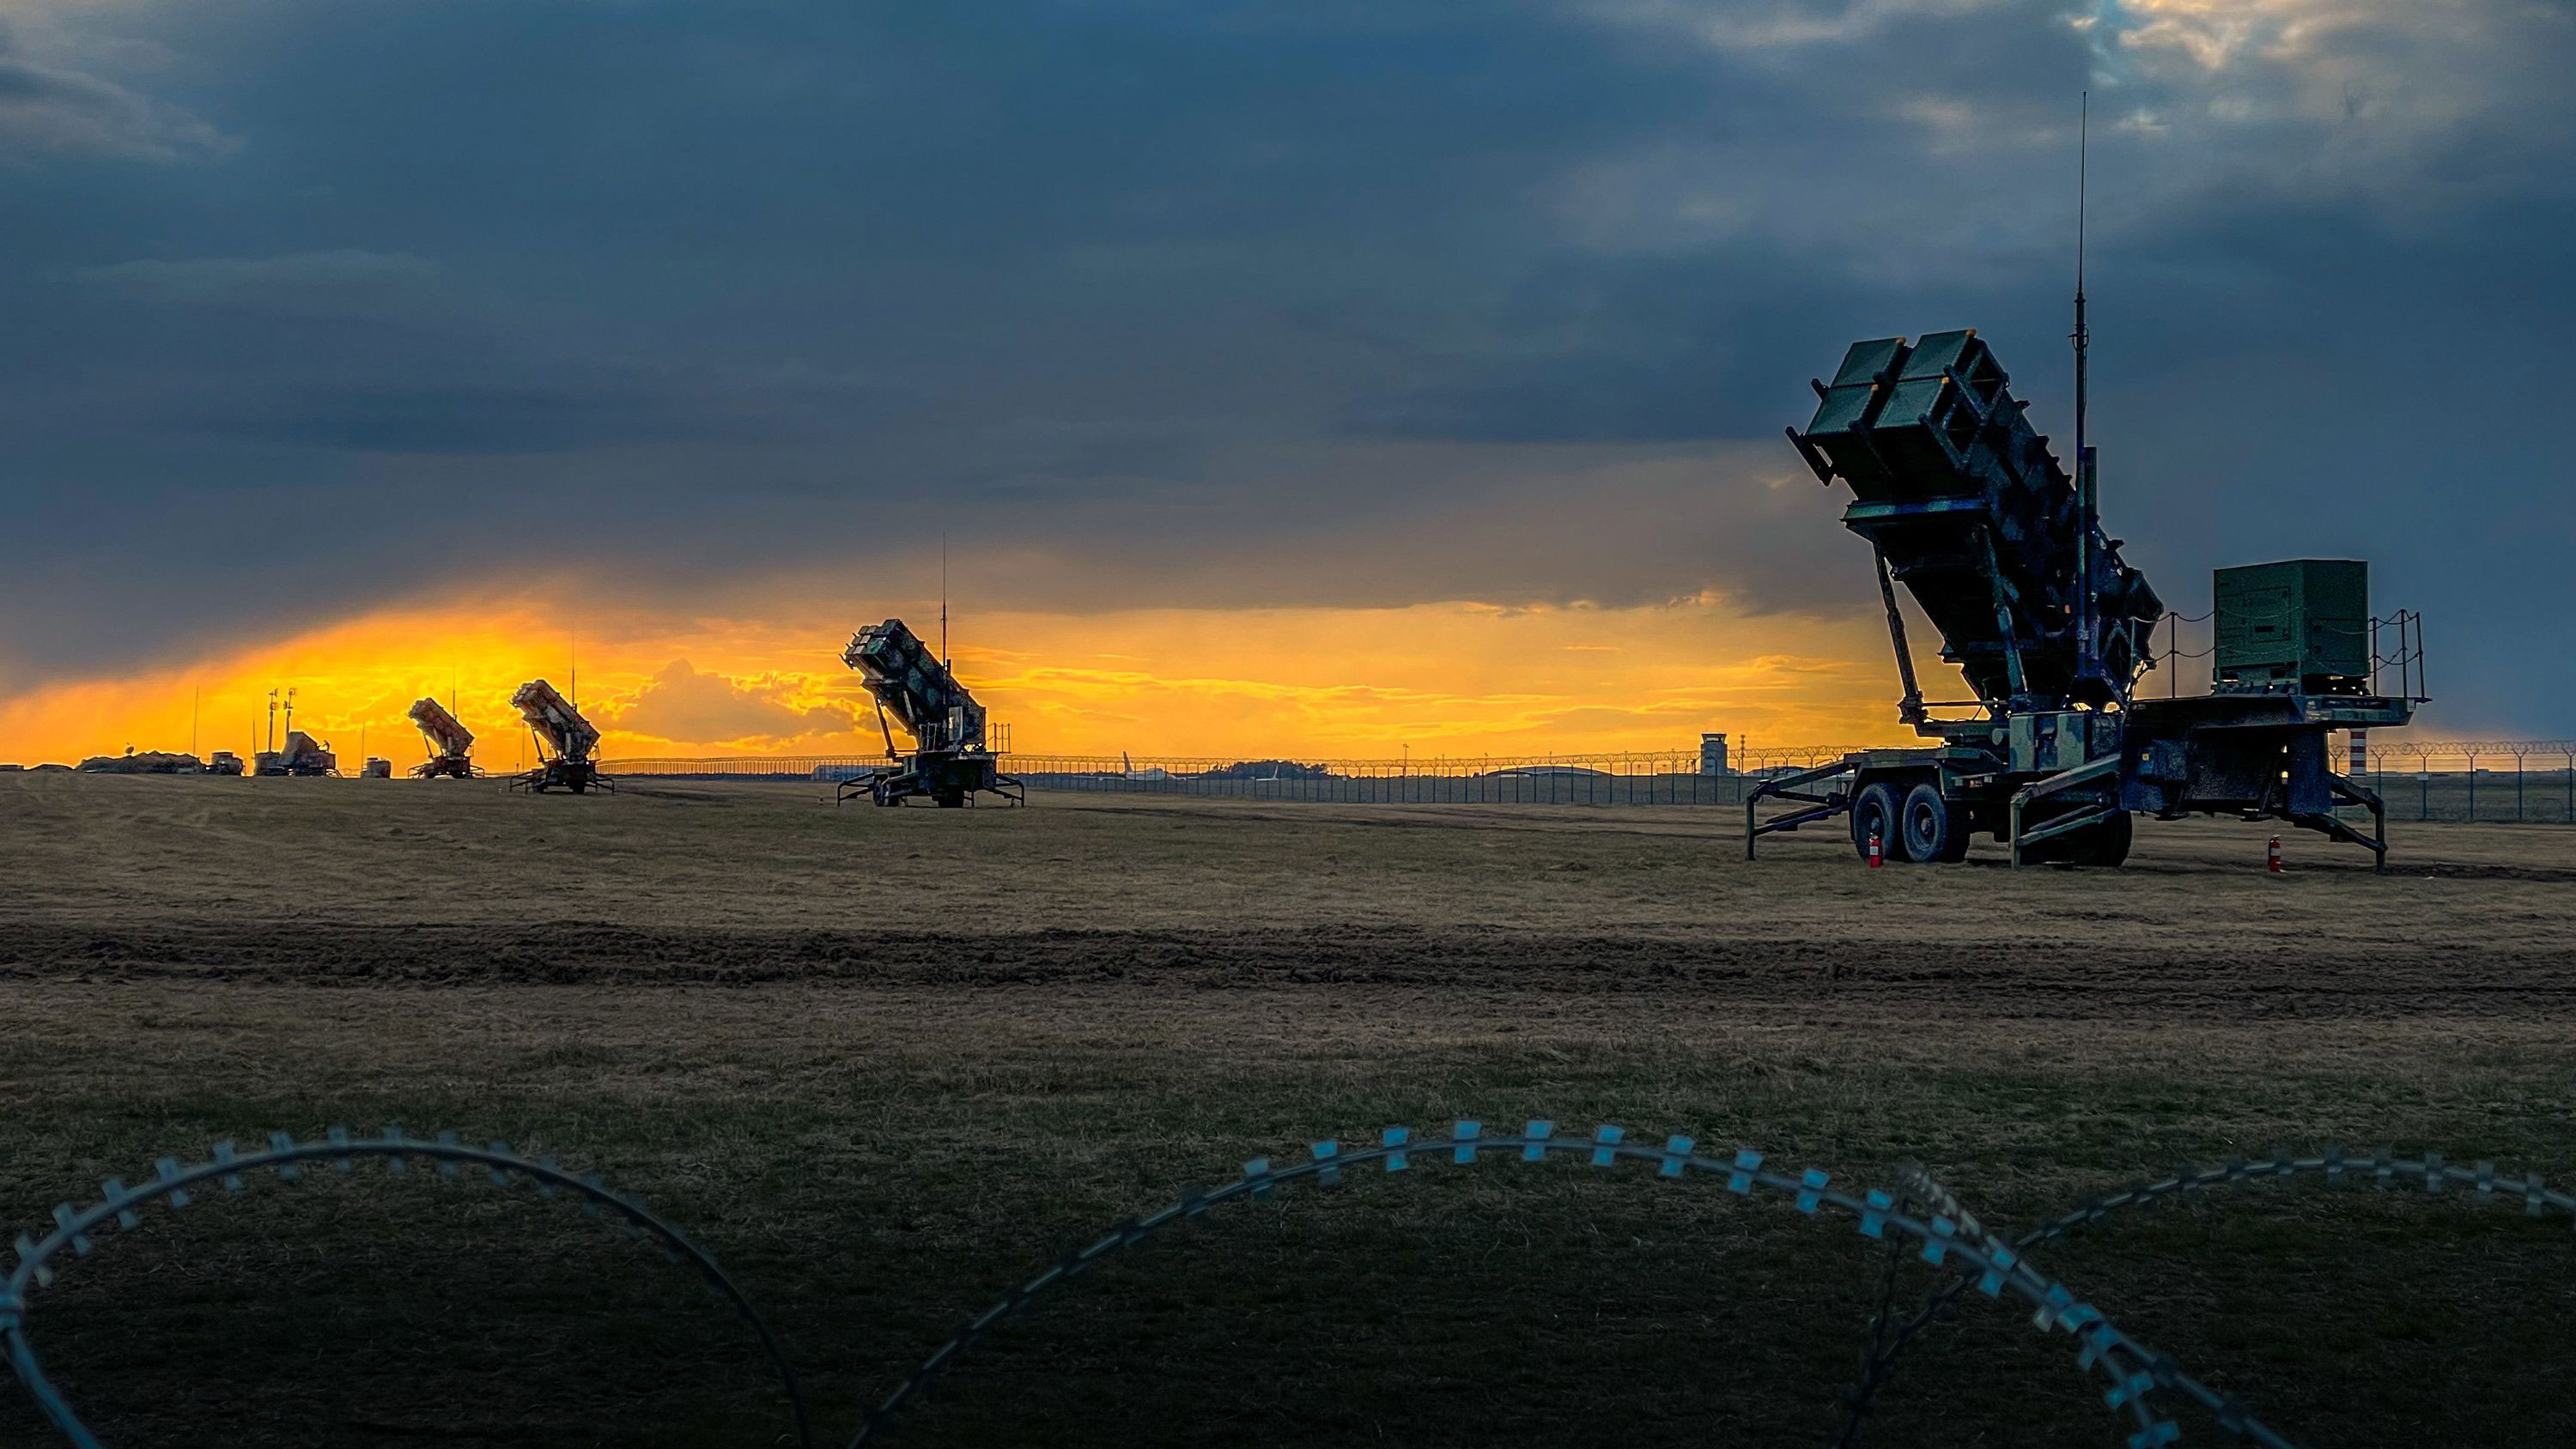 Patriot missile batteries from the 5th Battalion, 7th Air Defense Artillery Regiment stand ready at sunset in Poland on April 10, 2022. 